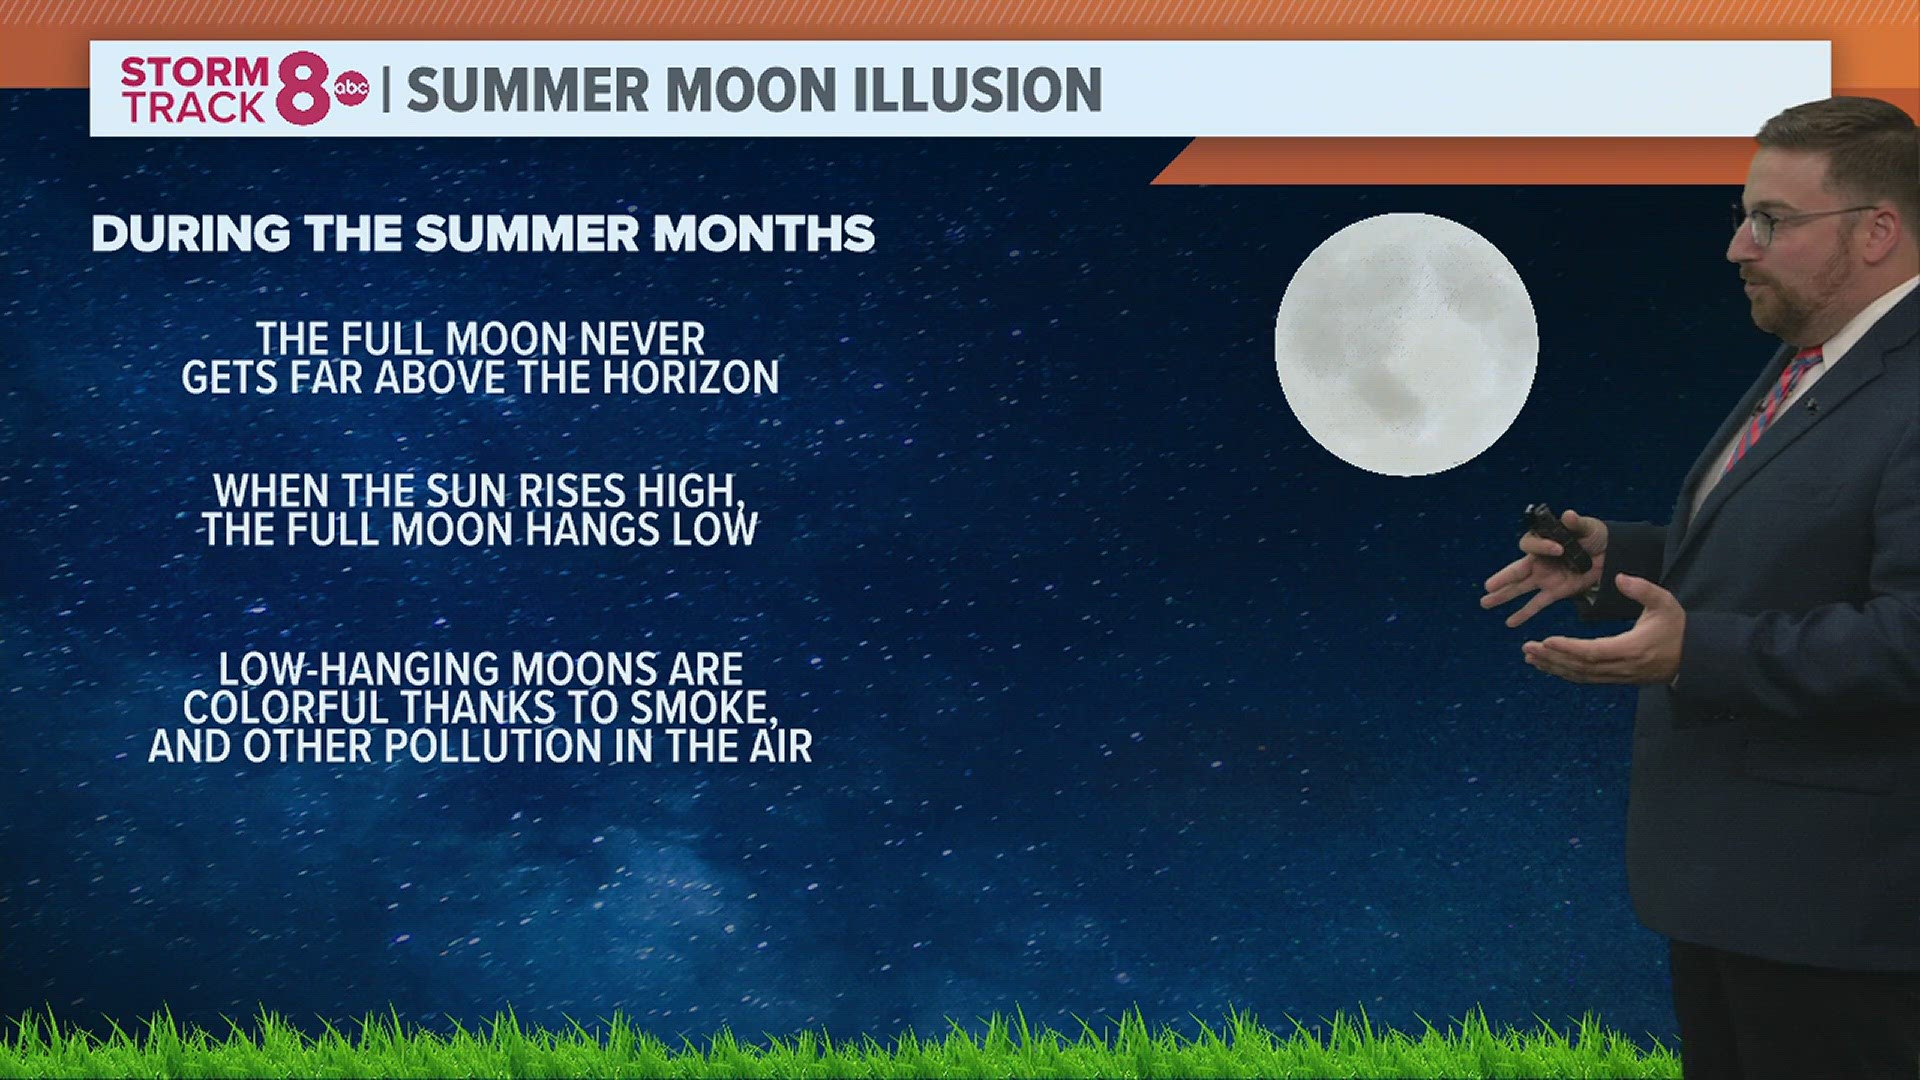 Here's why the moon appears larger, brighter, and more colorful during the summer months.